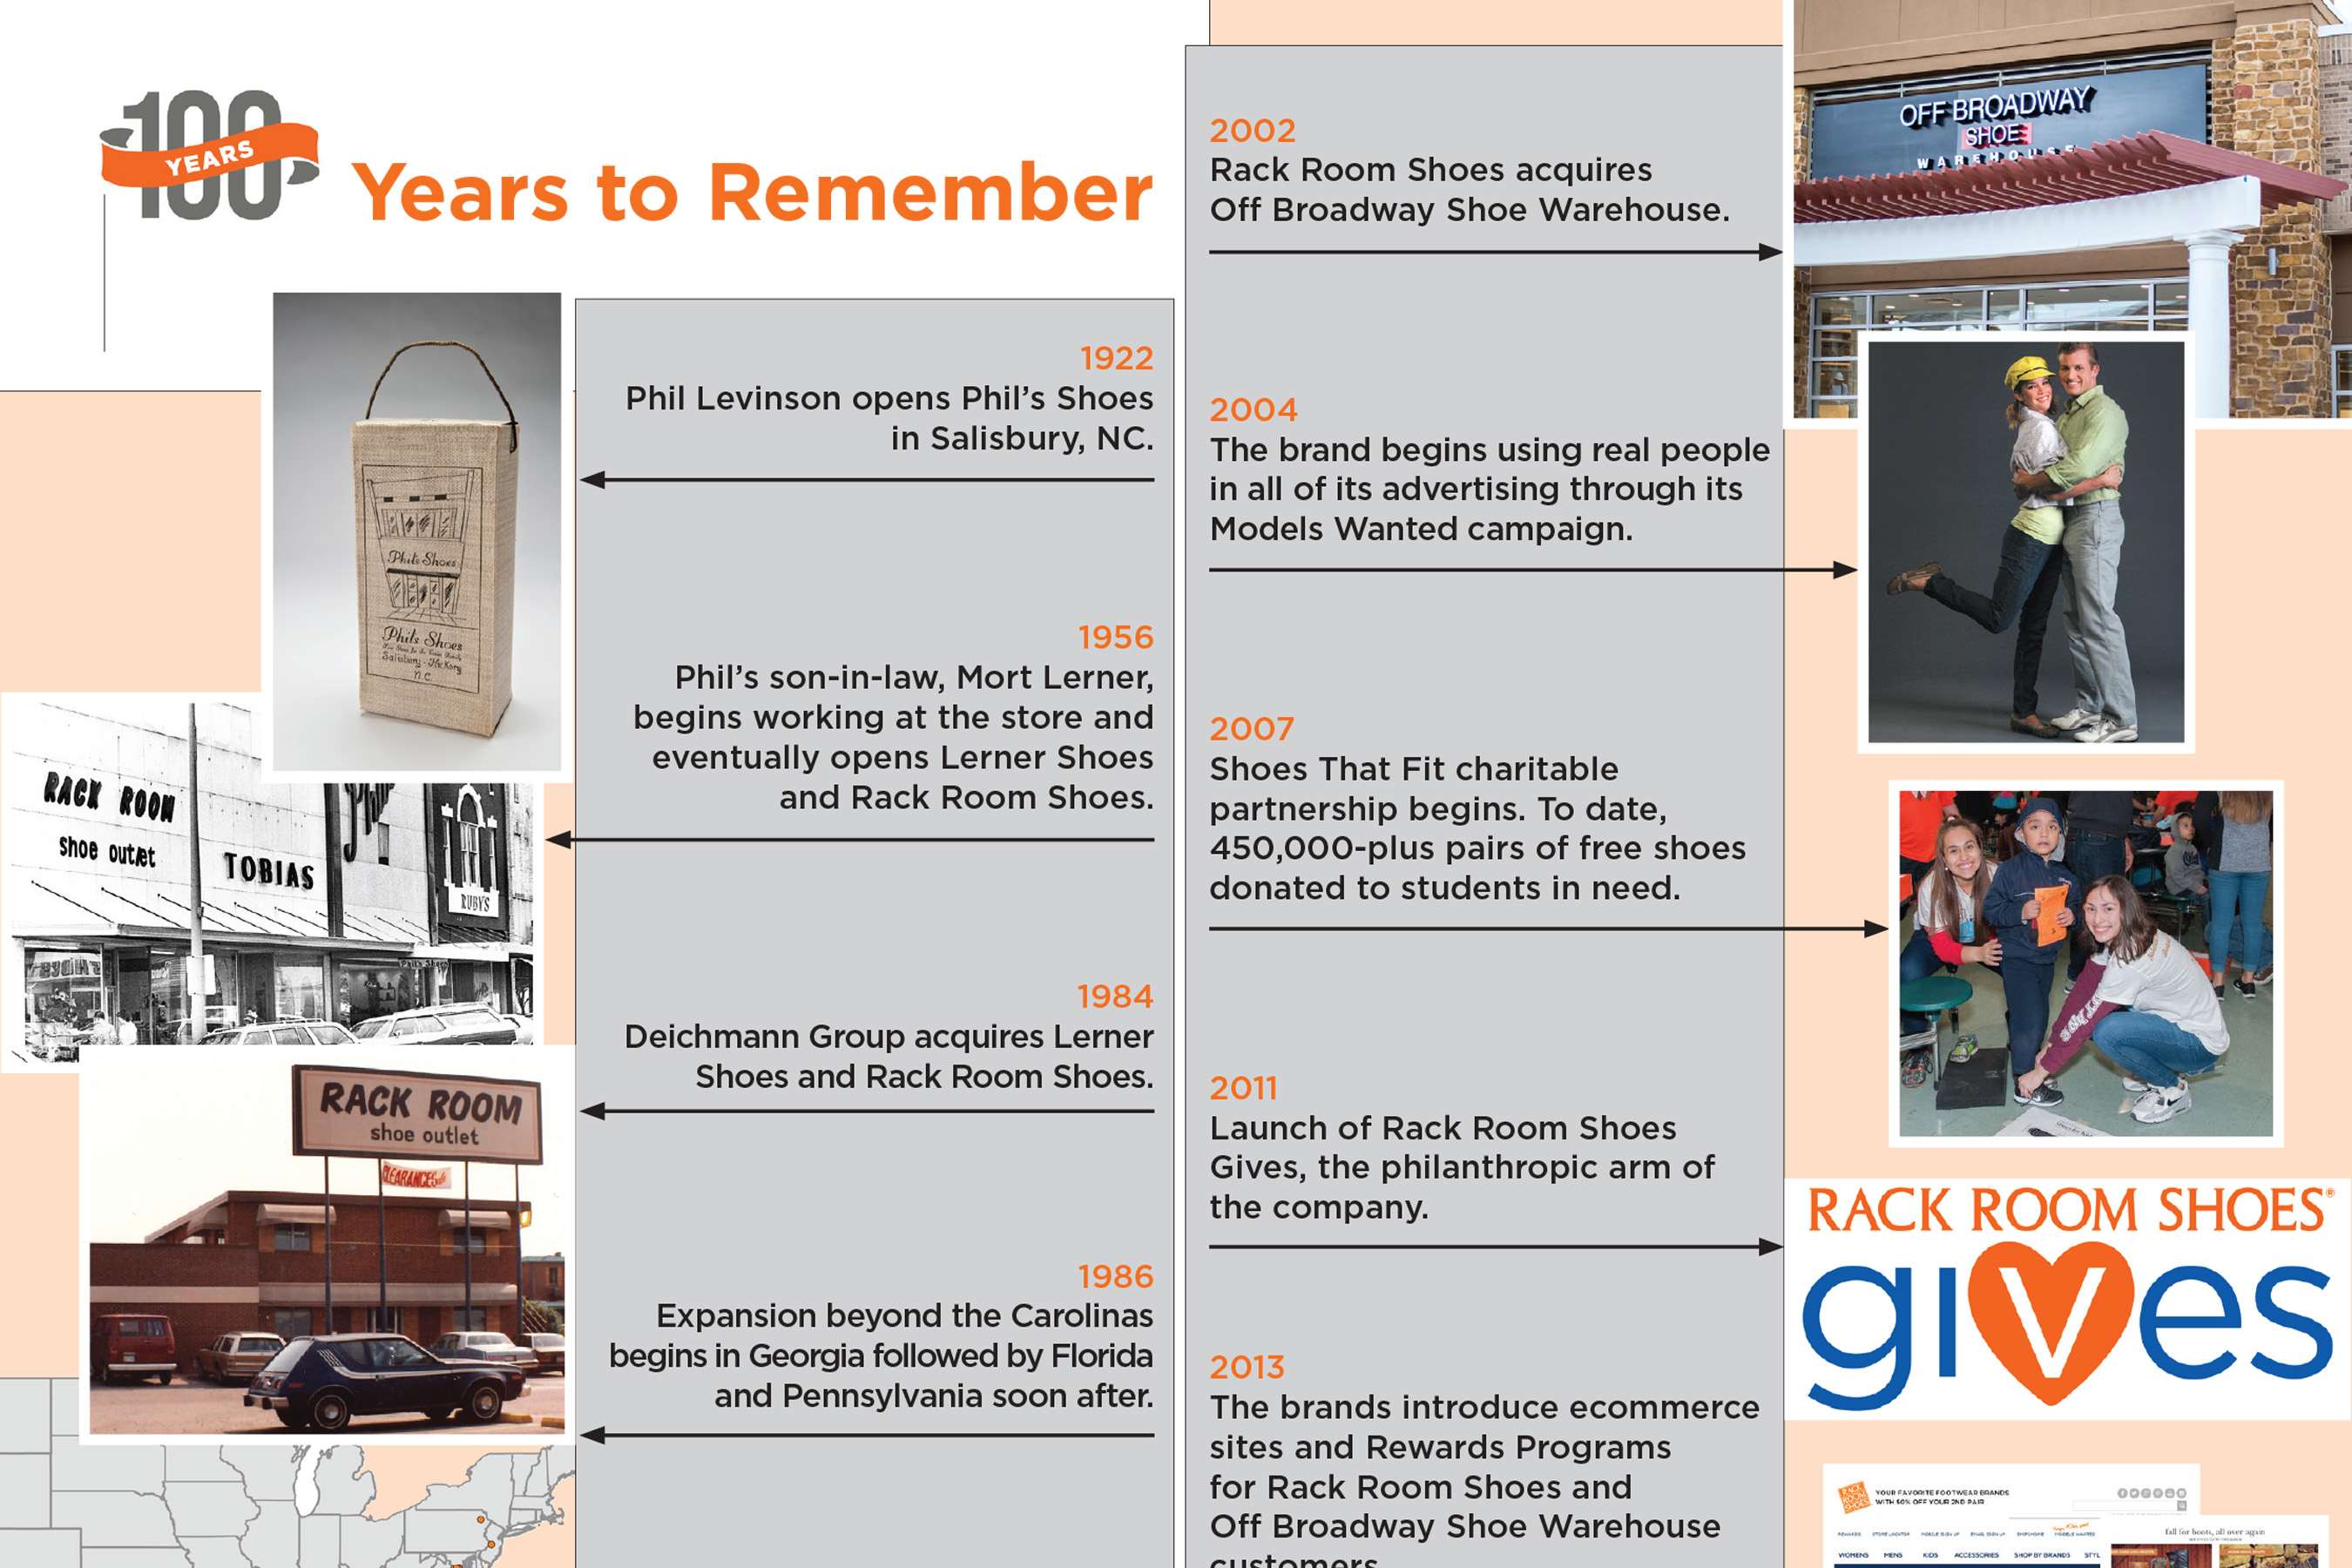 For us, every day is not only a new challenge but a new opportunity to better ourselves and our company. We've stepped up for decades - with no signs of stopping. Here is a timeline of important milestones in Rack Room Shoes' history.